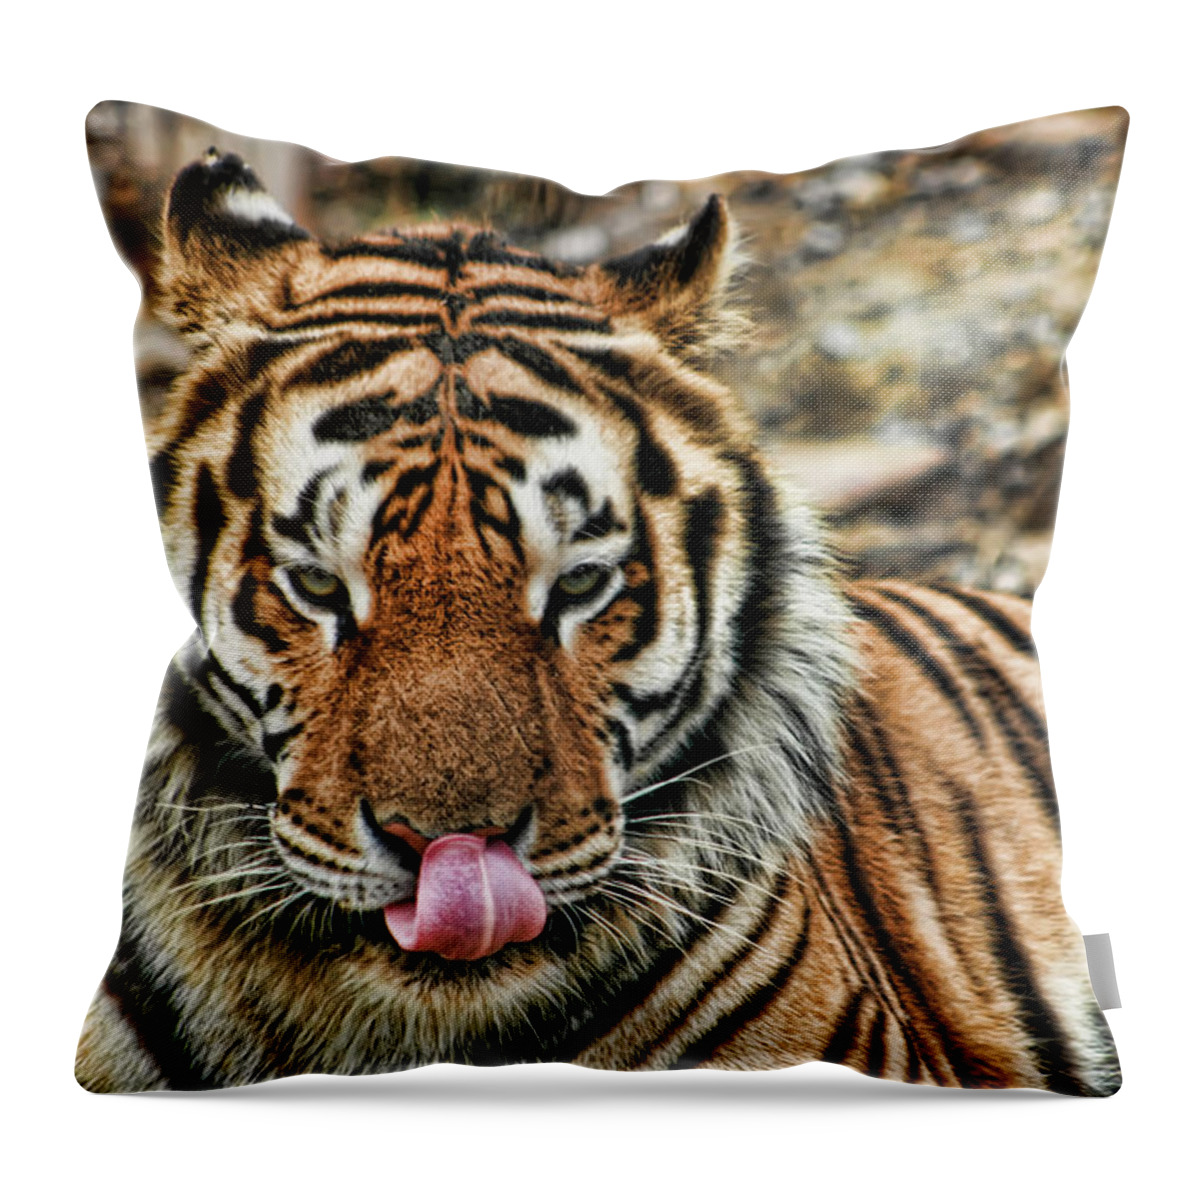 Tiger Throw Pillow featuring the photograph A Tiger And His Tongue by Scott Wood